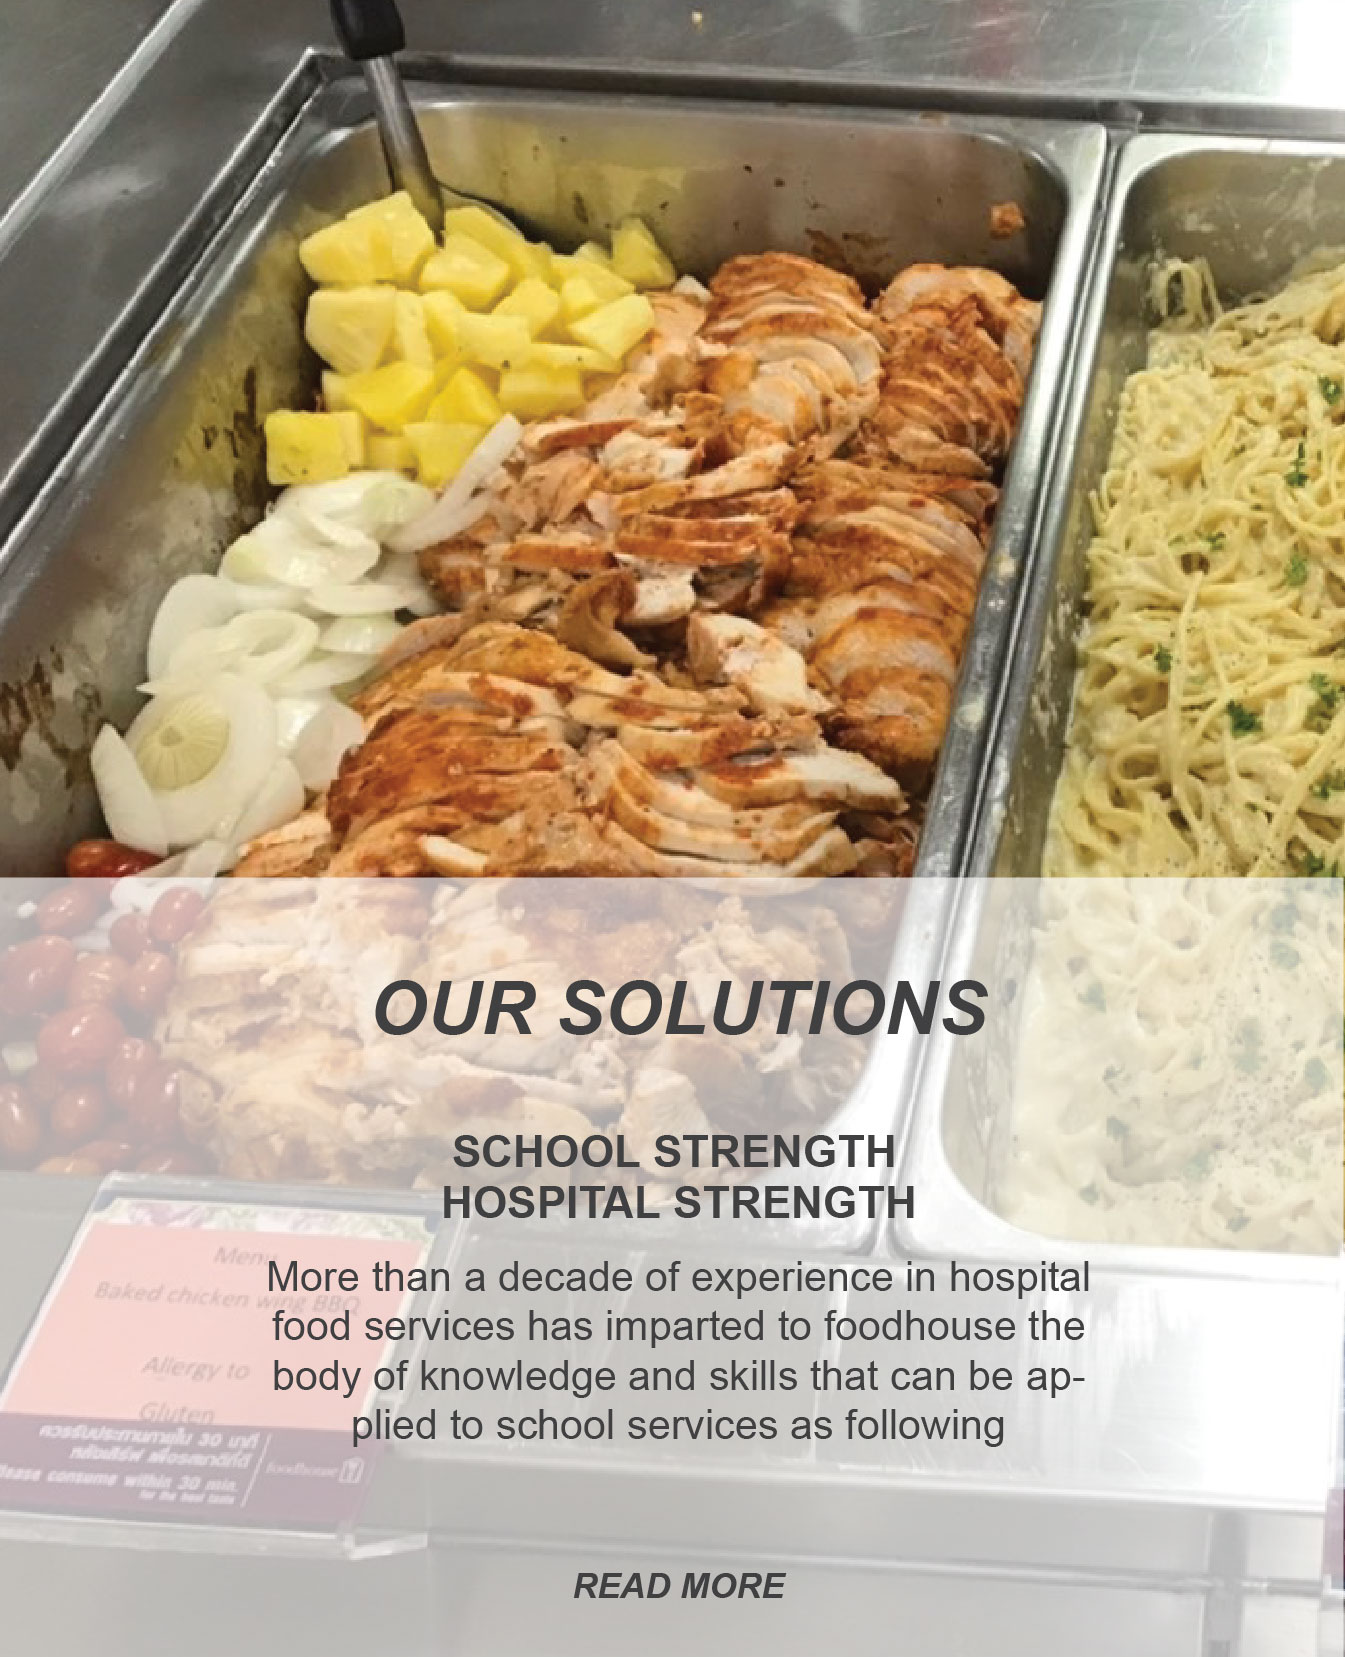 food house catering service for school by using knowledge and skills from hospital food services that can be applied to school services - foodhouse